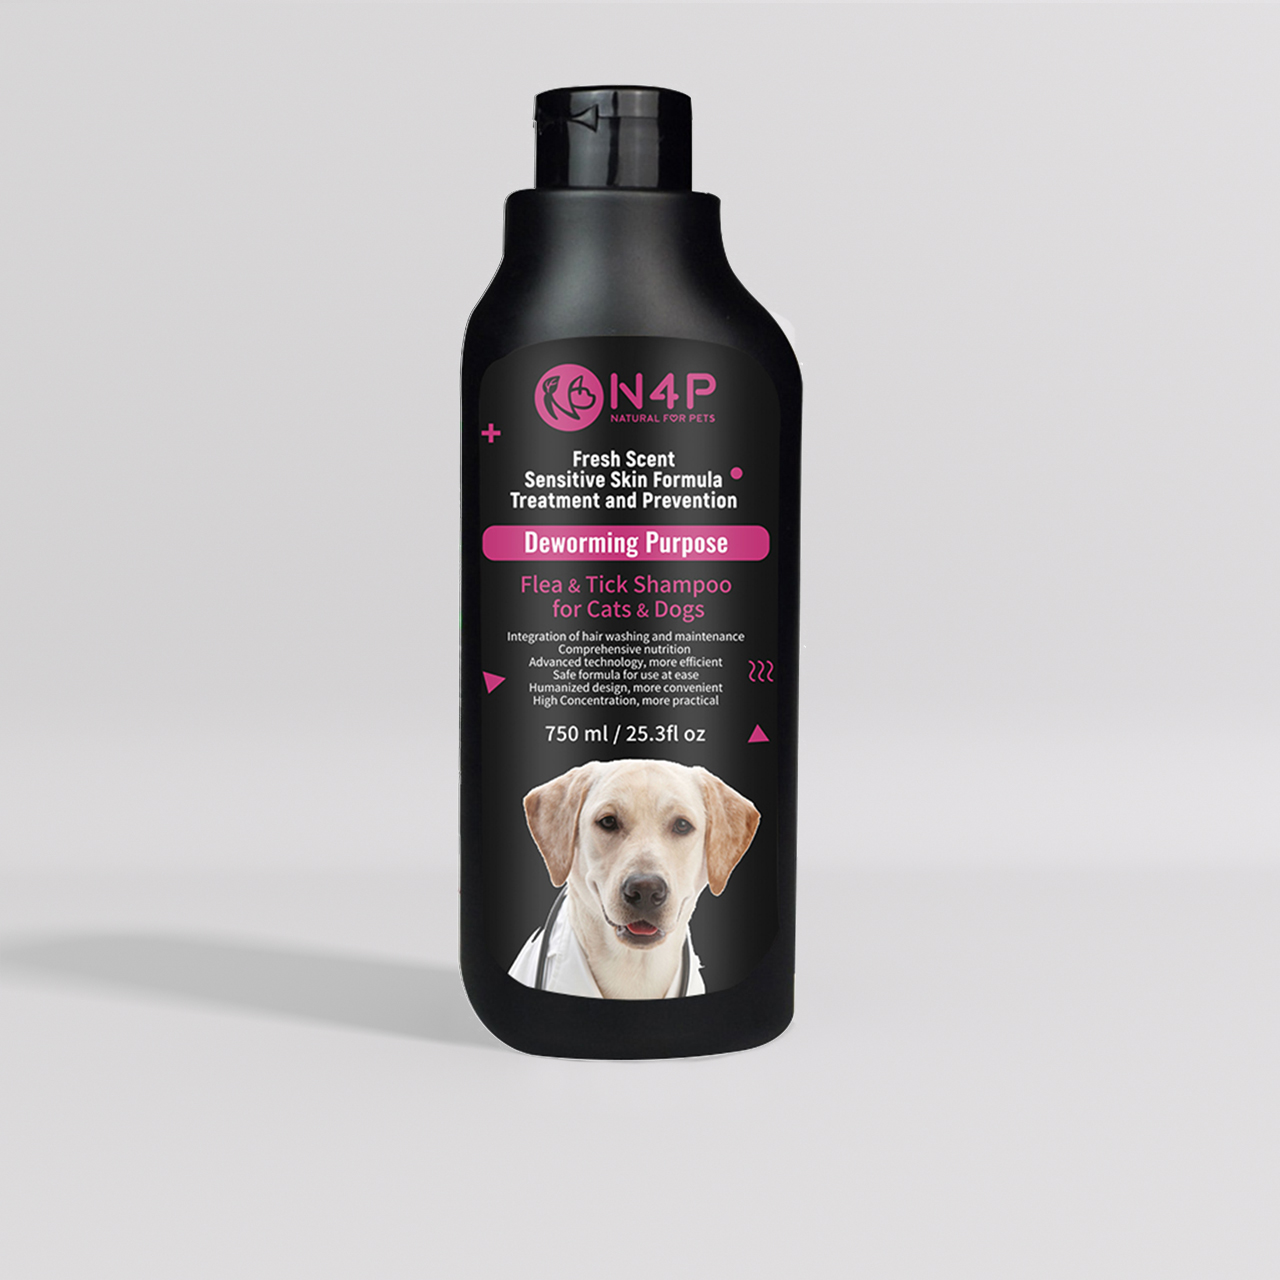 Pets Shampoo Deworming Purpose 750ml for Dogs & Cats